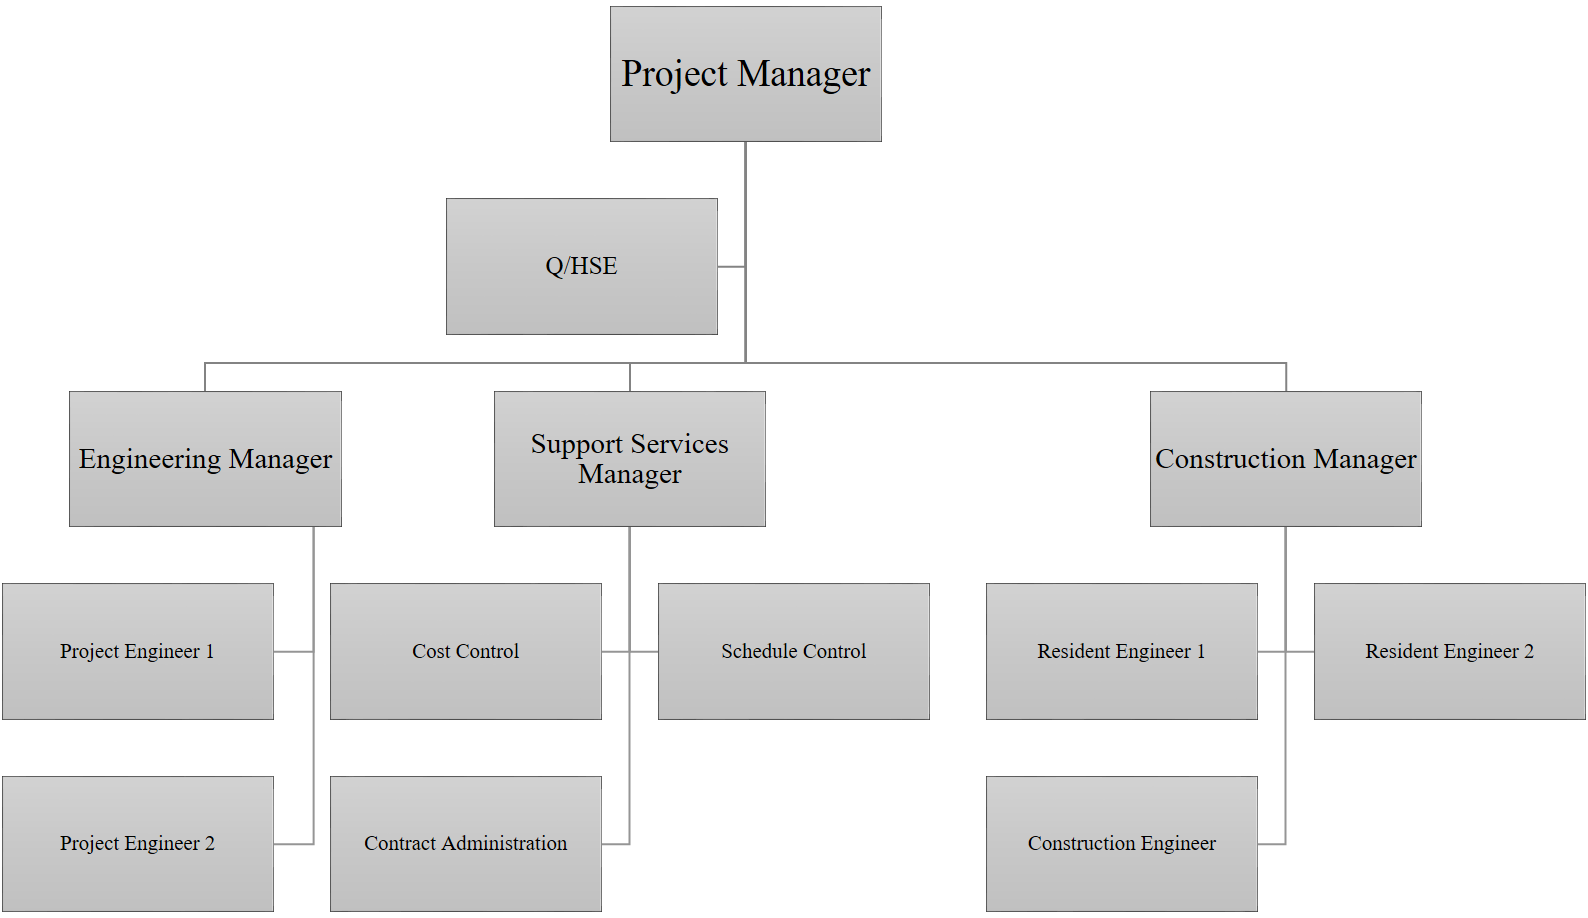 Project Management Team, typical structure for capital projects